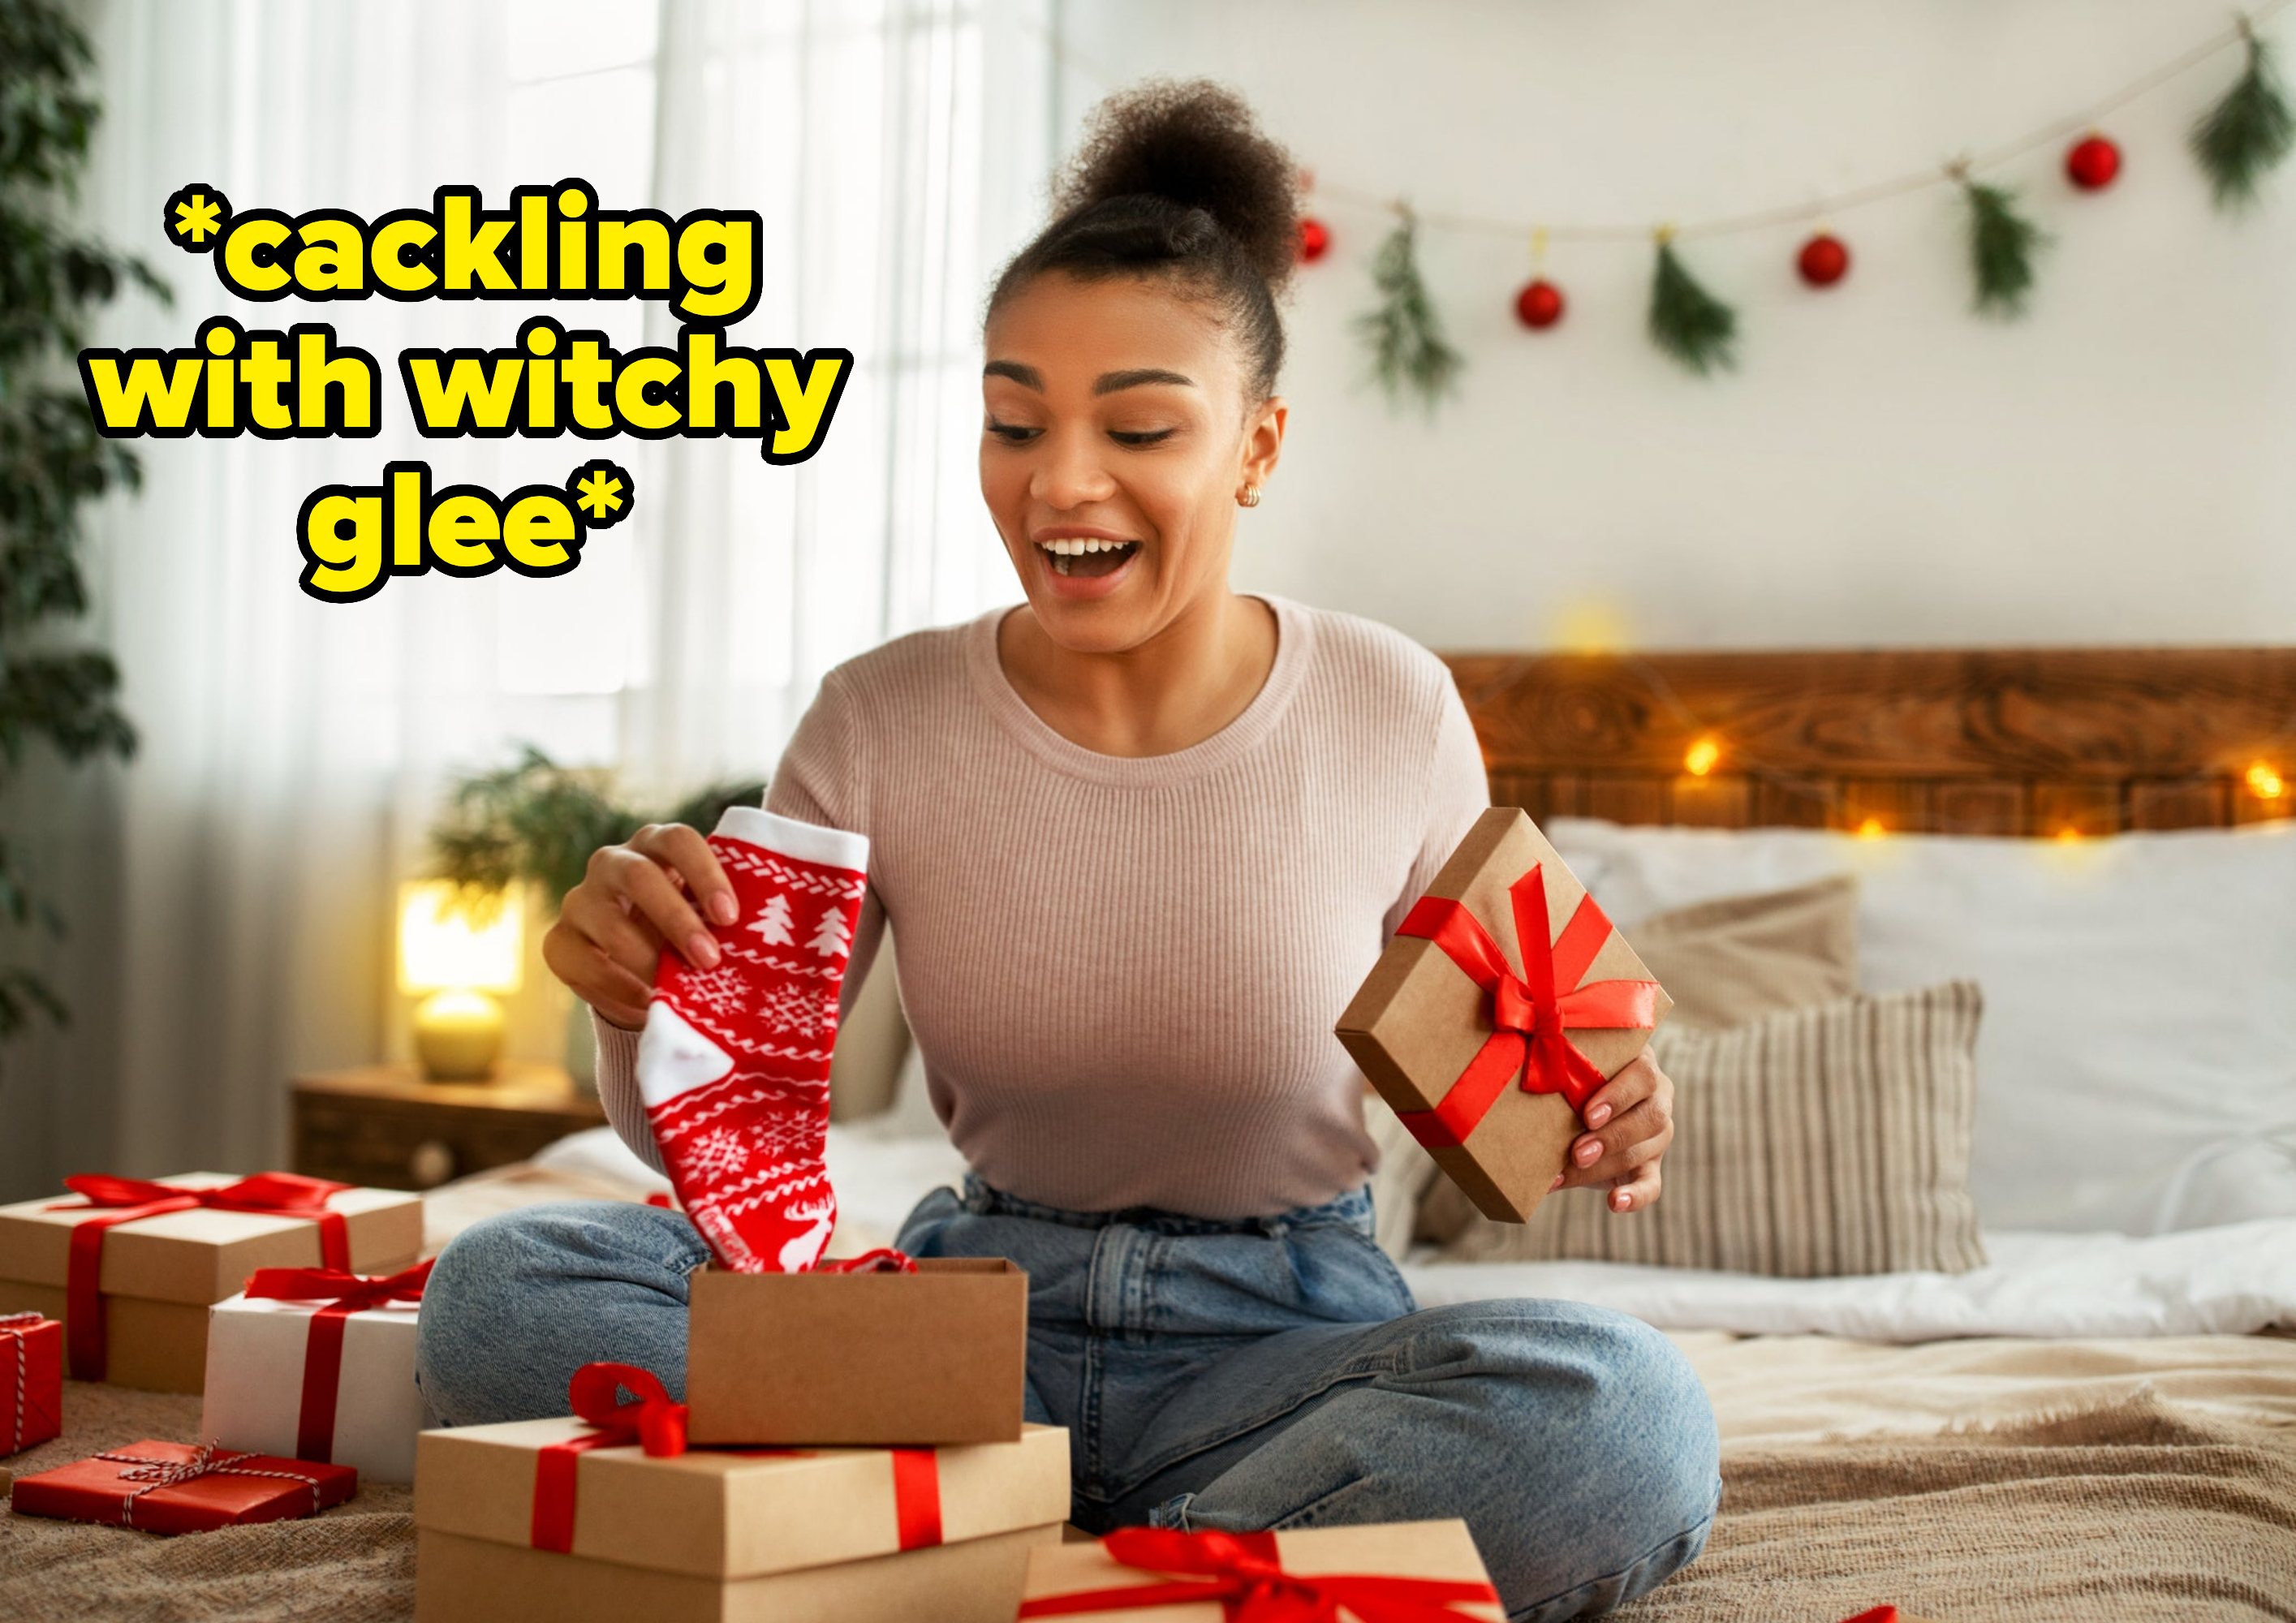 Woman with gift boxes, excitedly looks at a holiday stocking in a festively decorated room